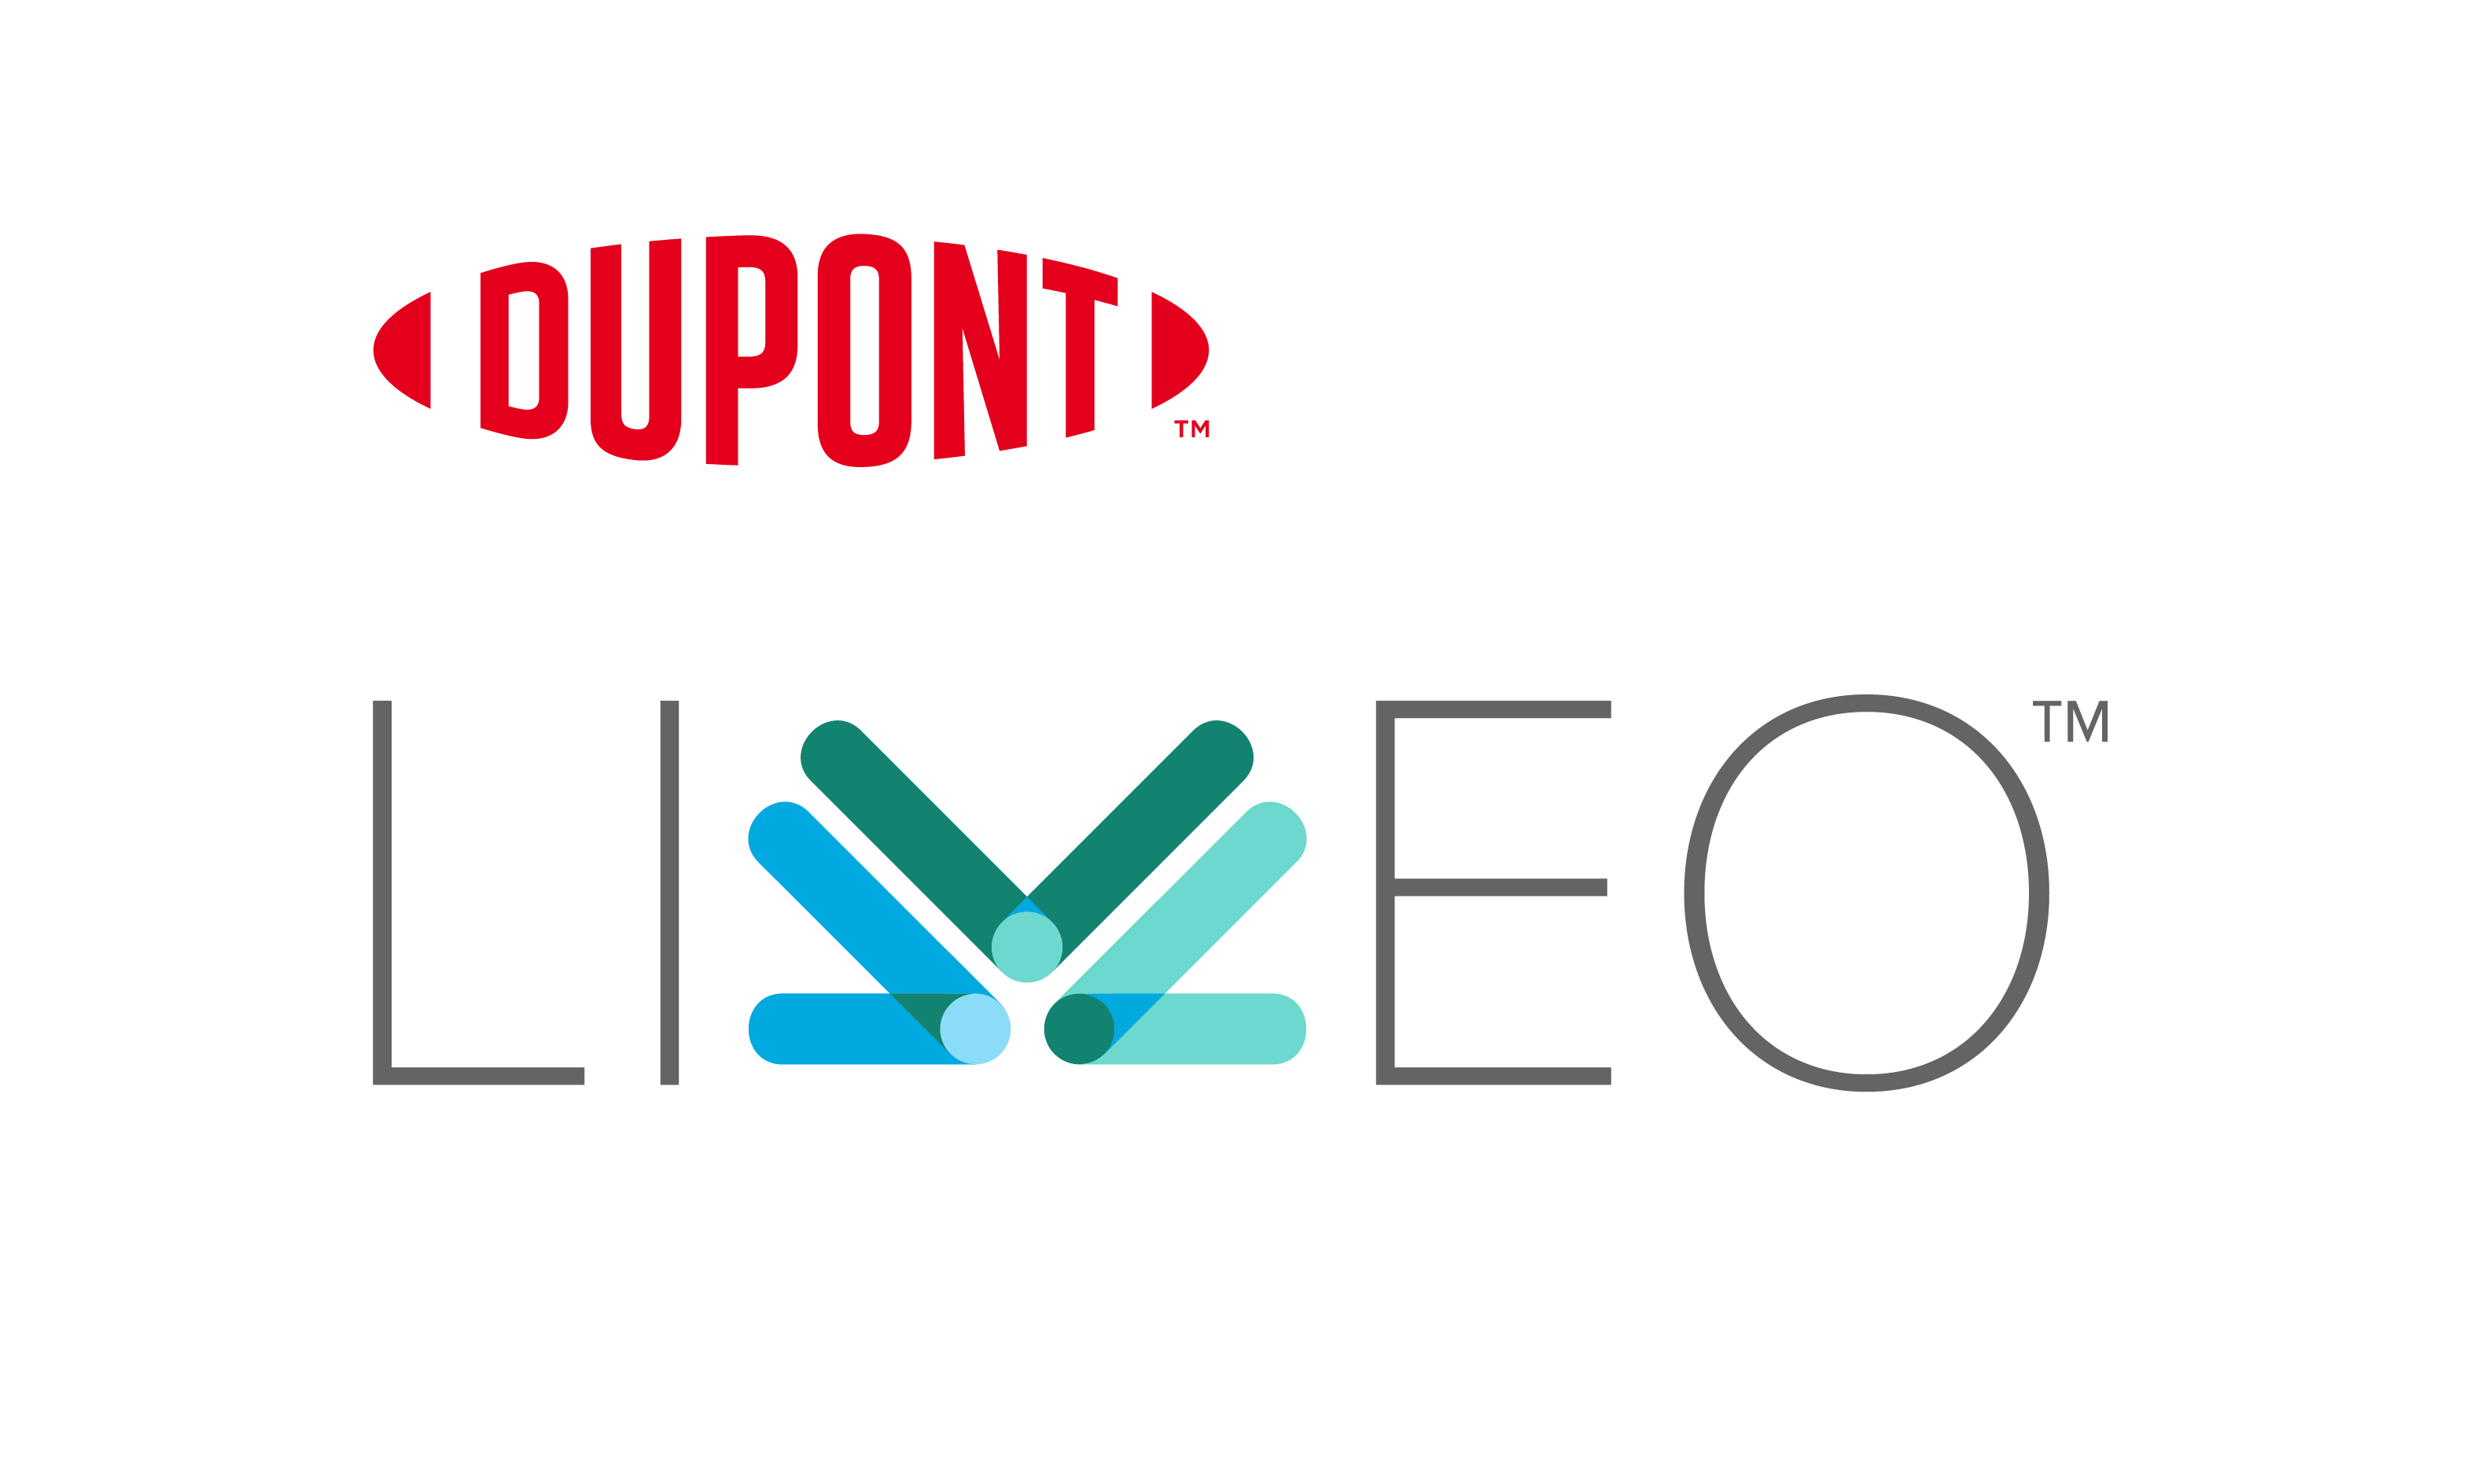 DuPont? Liveo? Healthcare Solutions